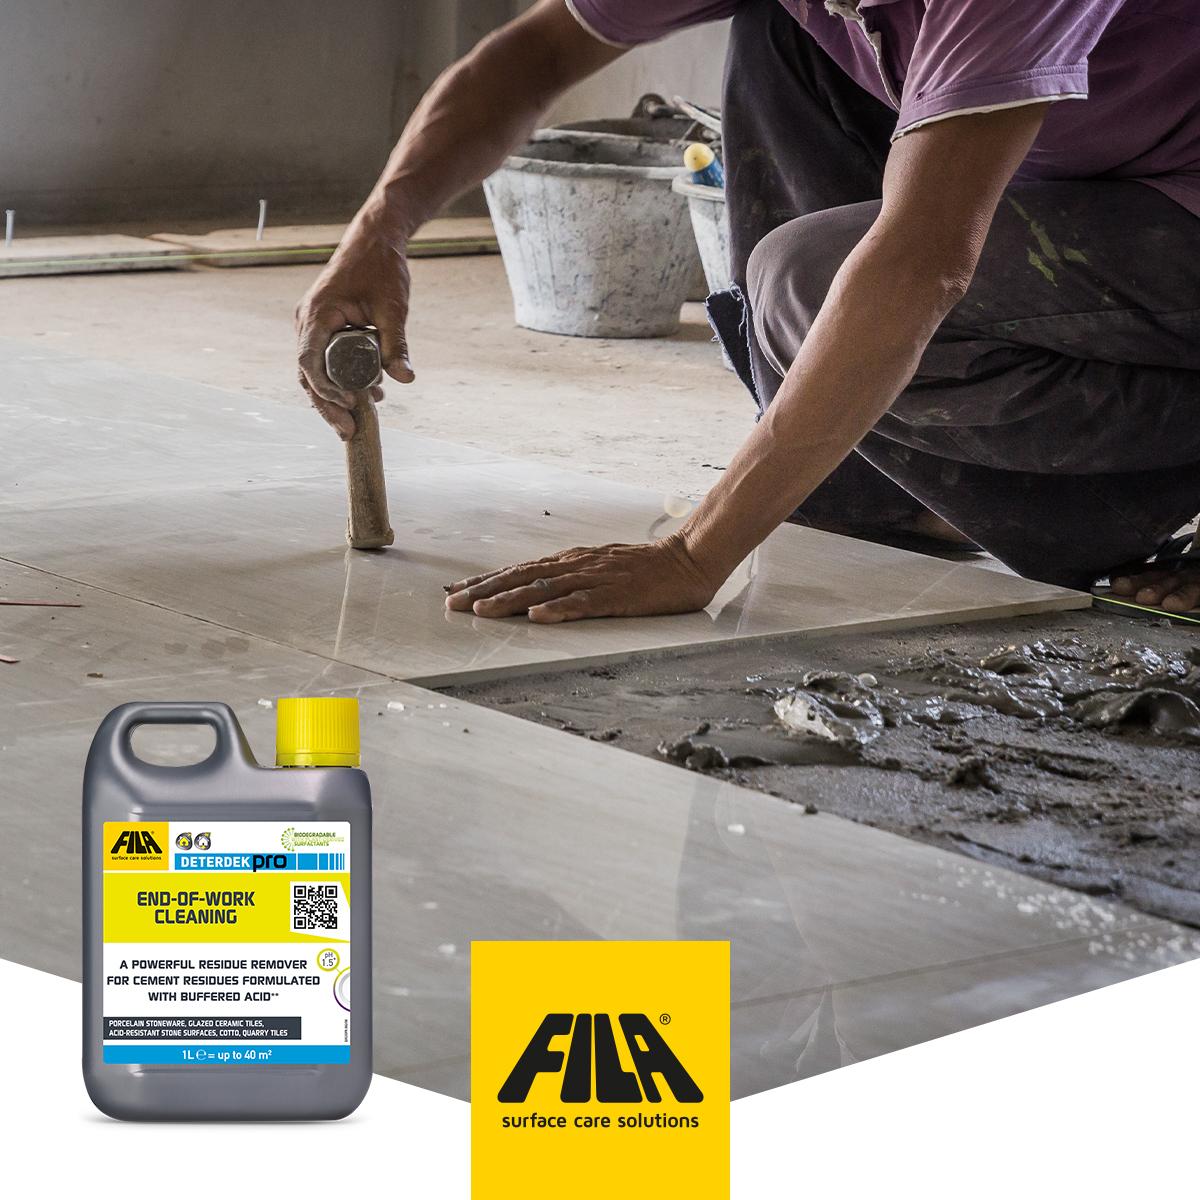 DETERDEK PRO Surface cleaning product By FILA Solutions